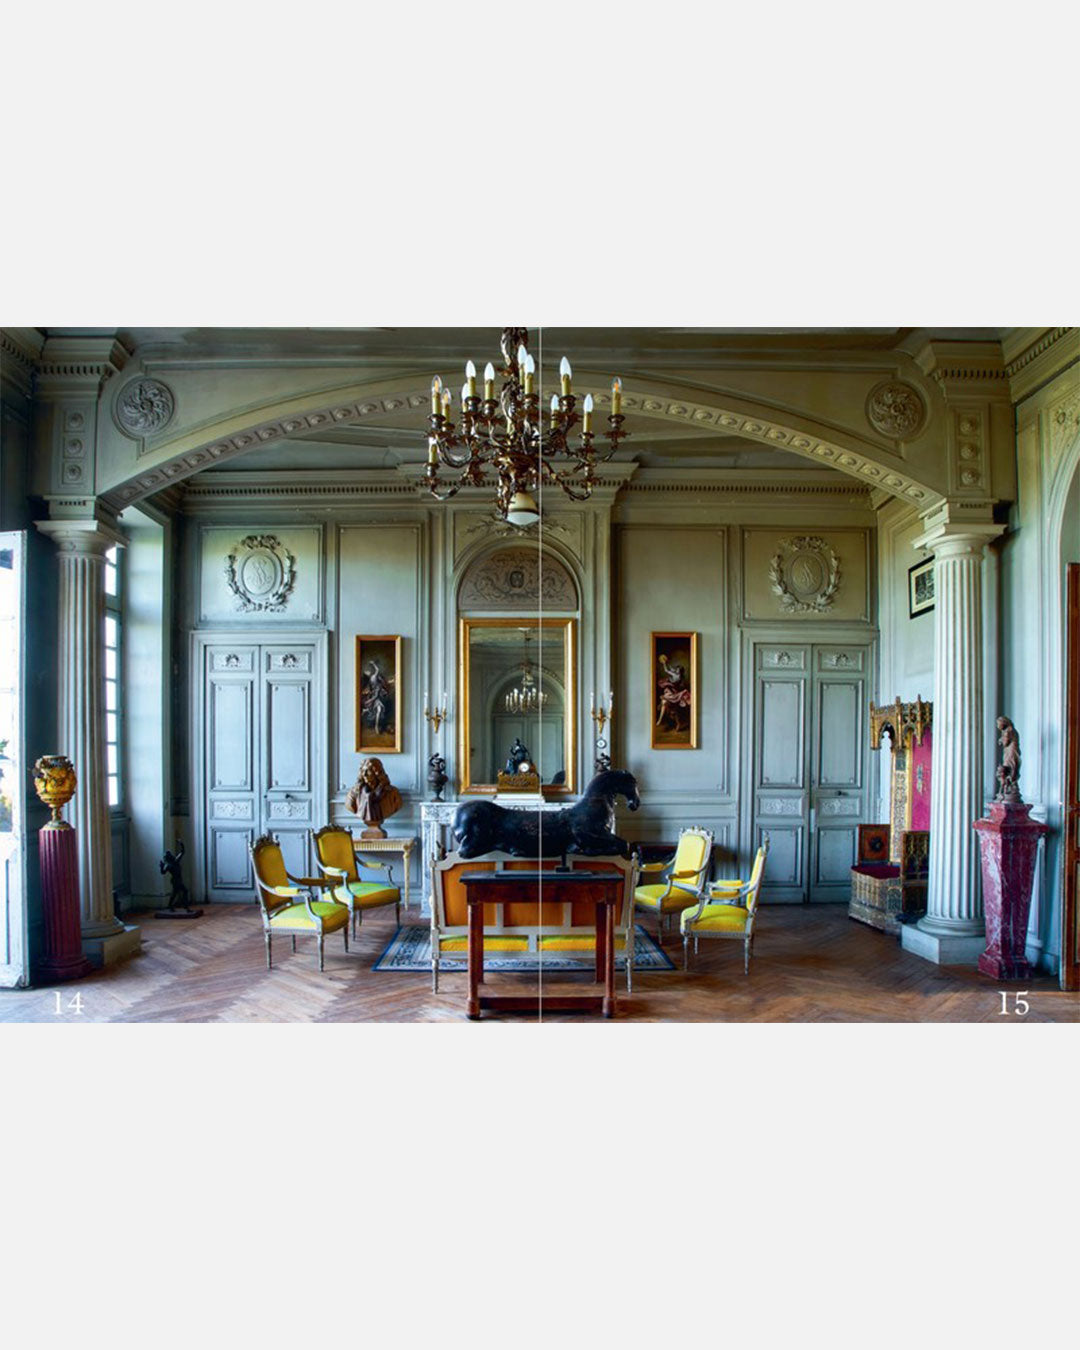 French Chateau Style: Inside France's Most Exquisite Private Homes by Catherine Scotto